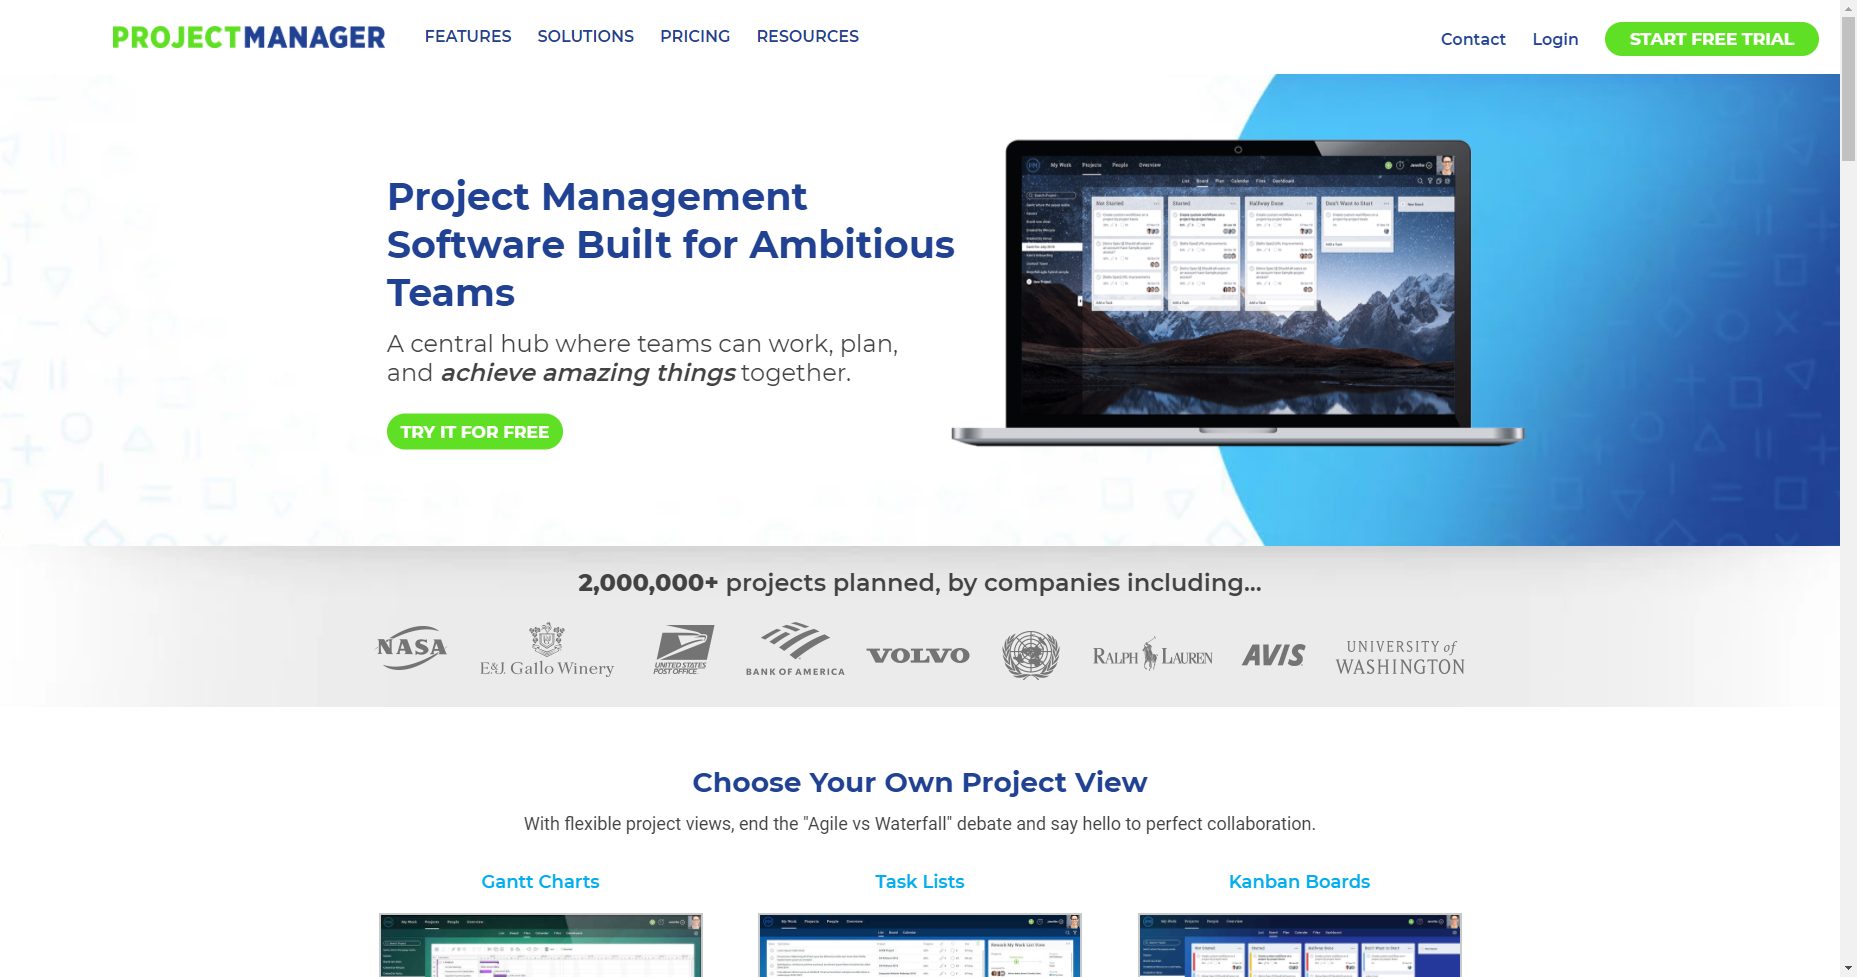 ProjectManager